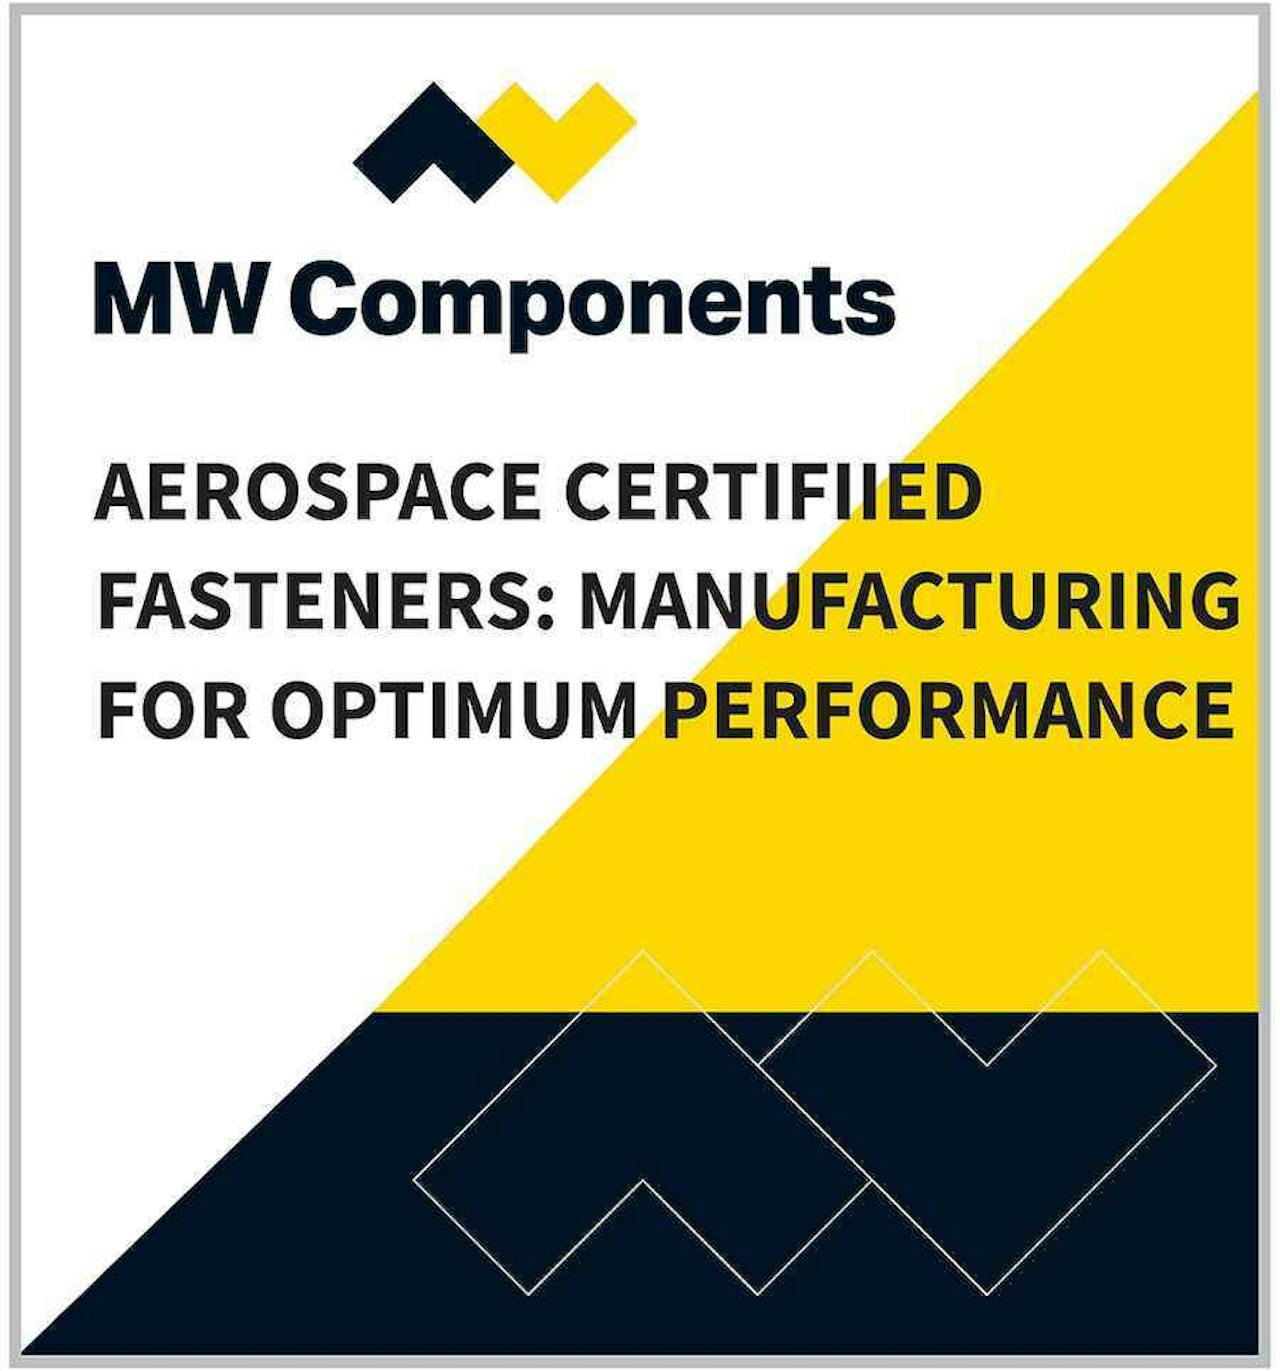 MWC Aerospace Certified Fasteners Manufacturing for Optimum Performance